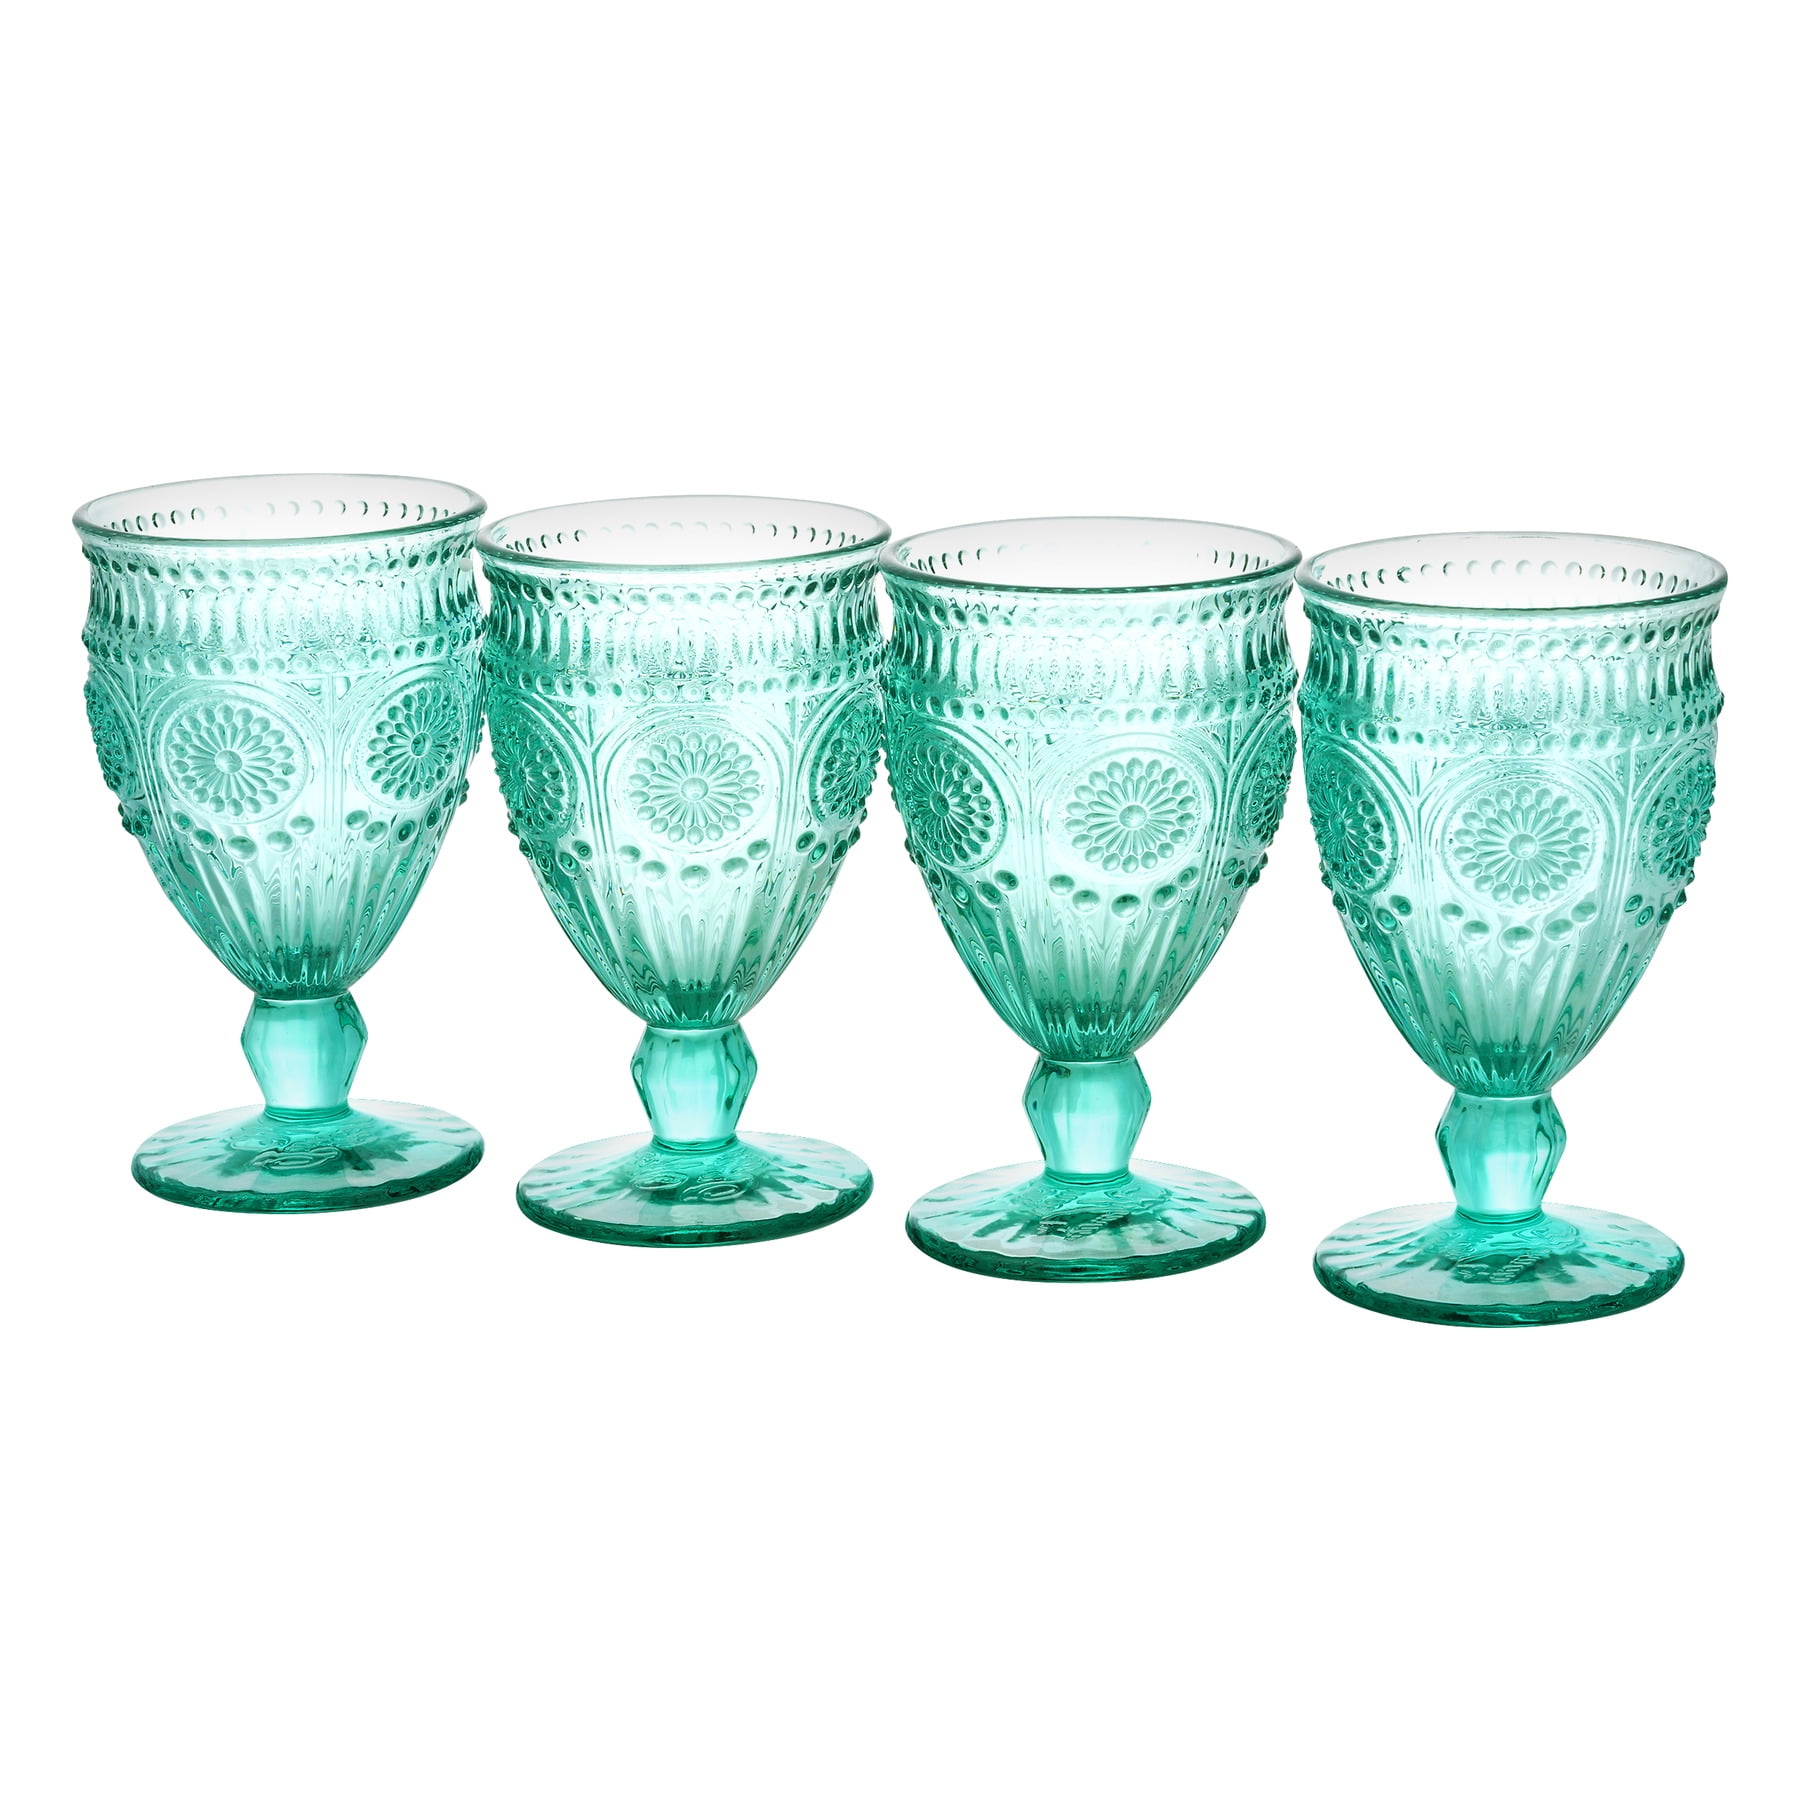 Adeline-Turquoise Small Fruit Dessert Bowl by Pioneer Woman Glass